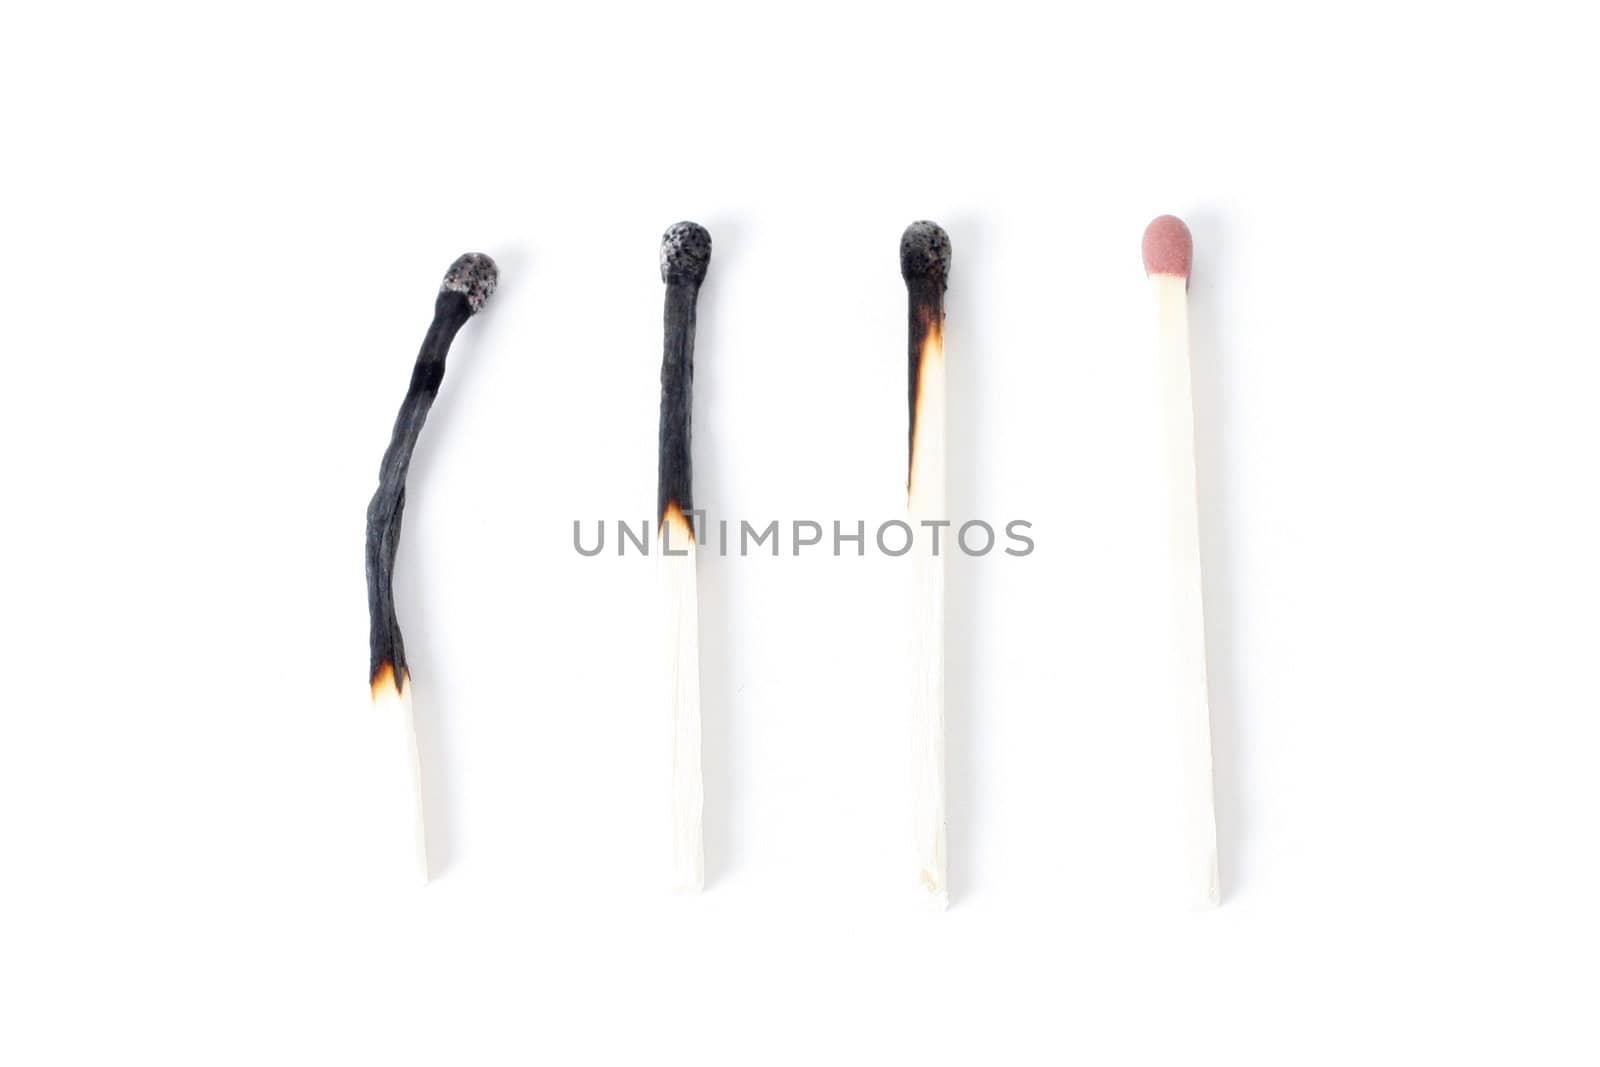 Matches showing a process of life